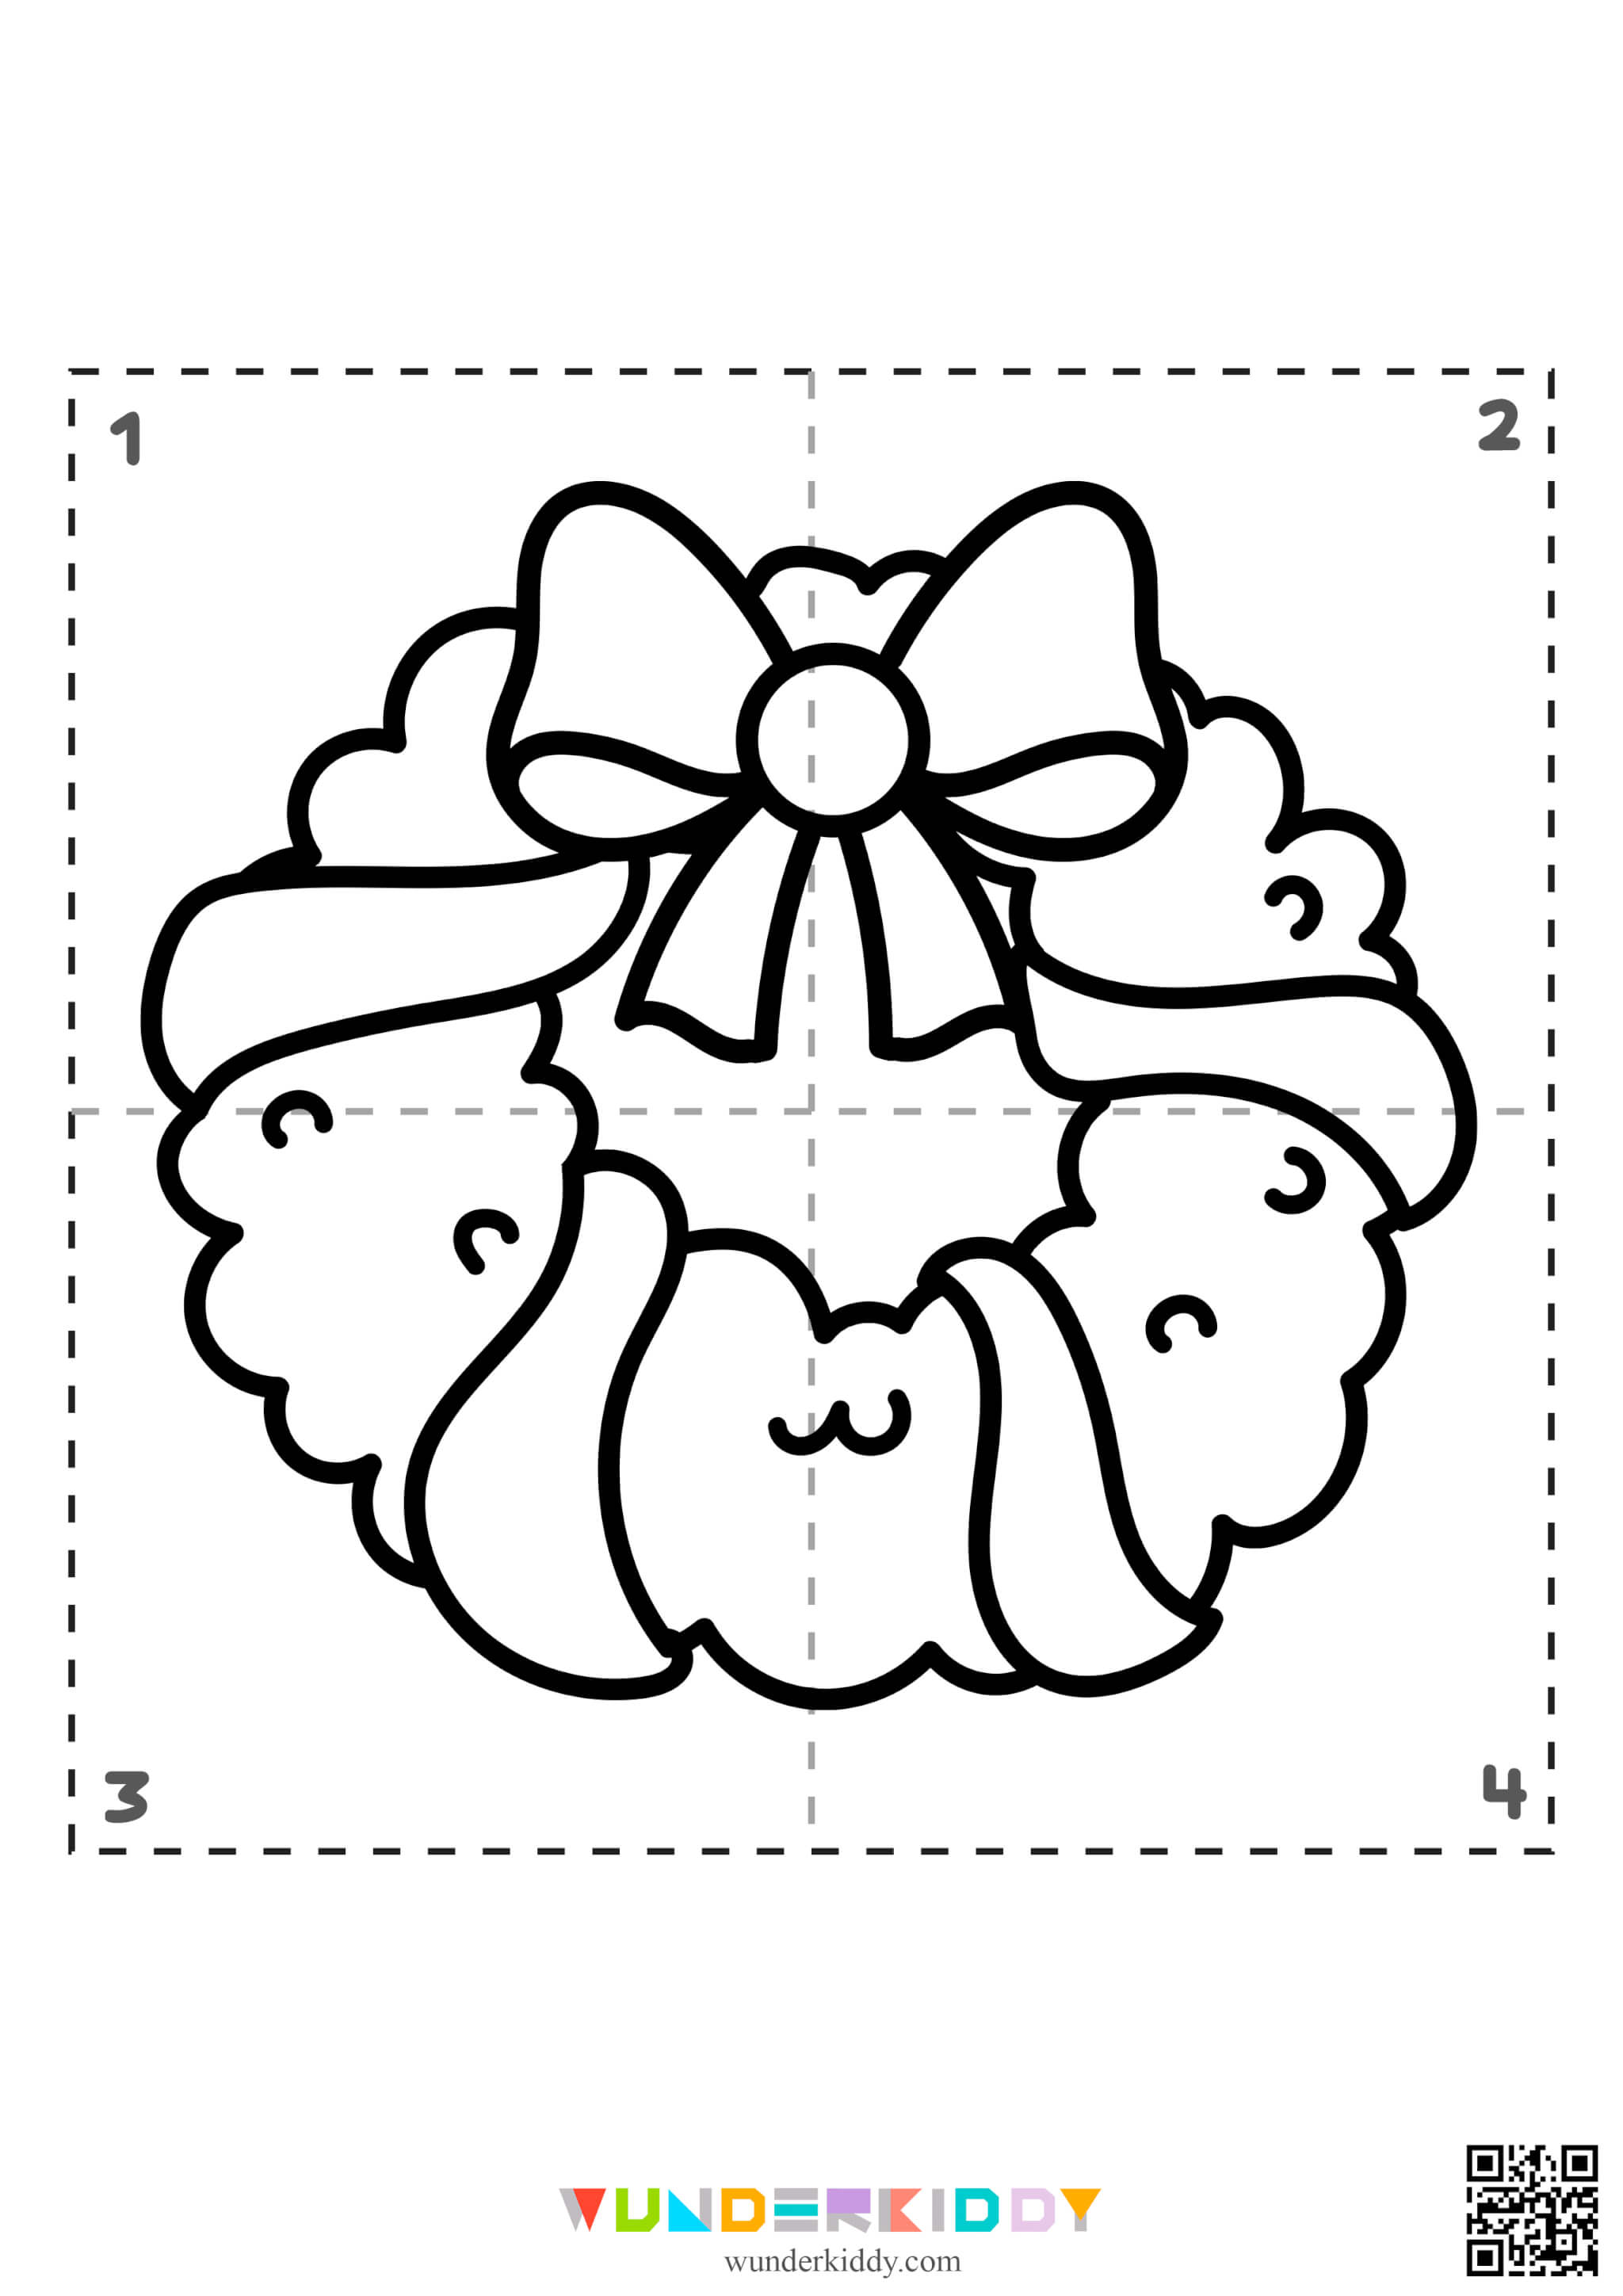 Coloring pages «New Year's Puzzle» - Image 11